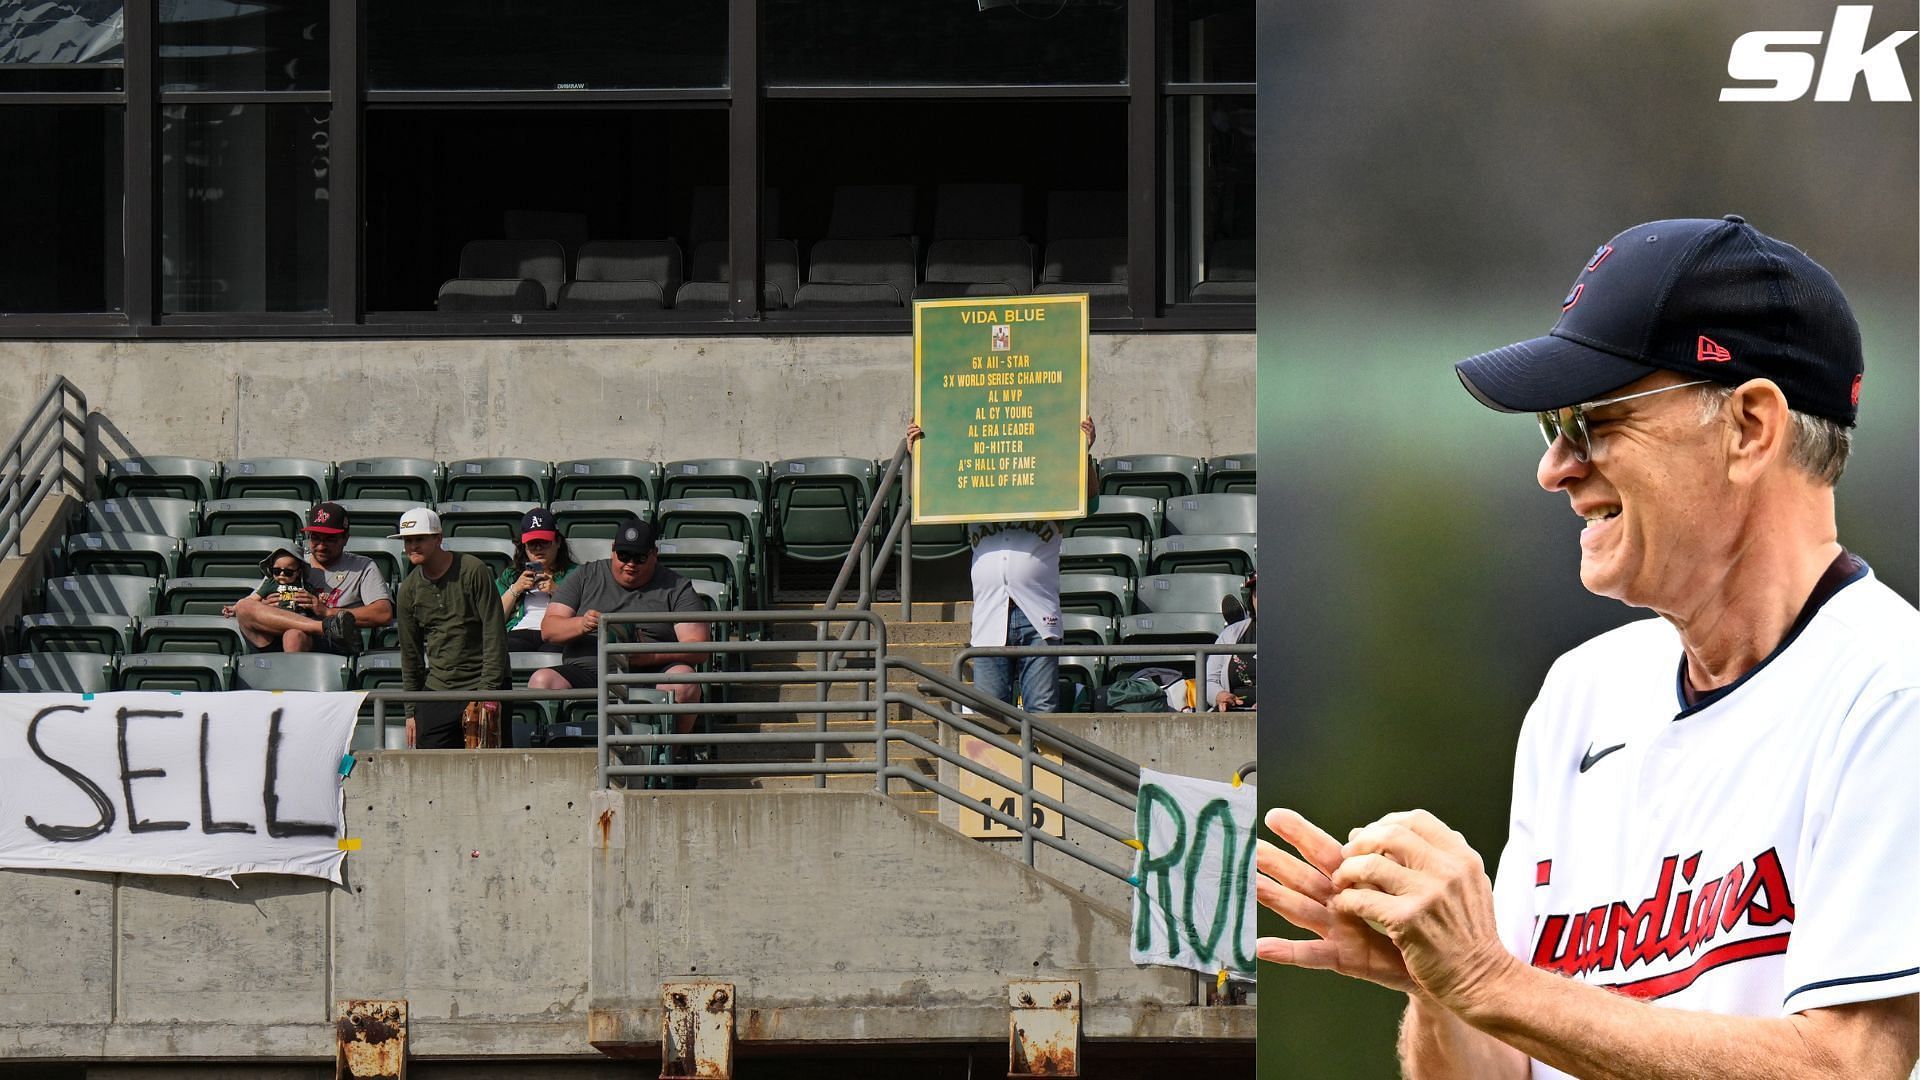 Actor Tom Hanks has given his input on the Oakland Athletics relocation